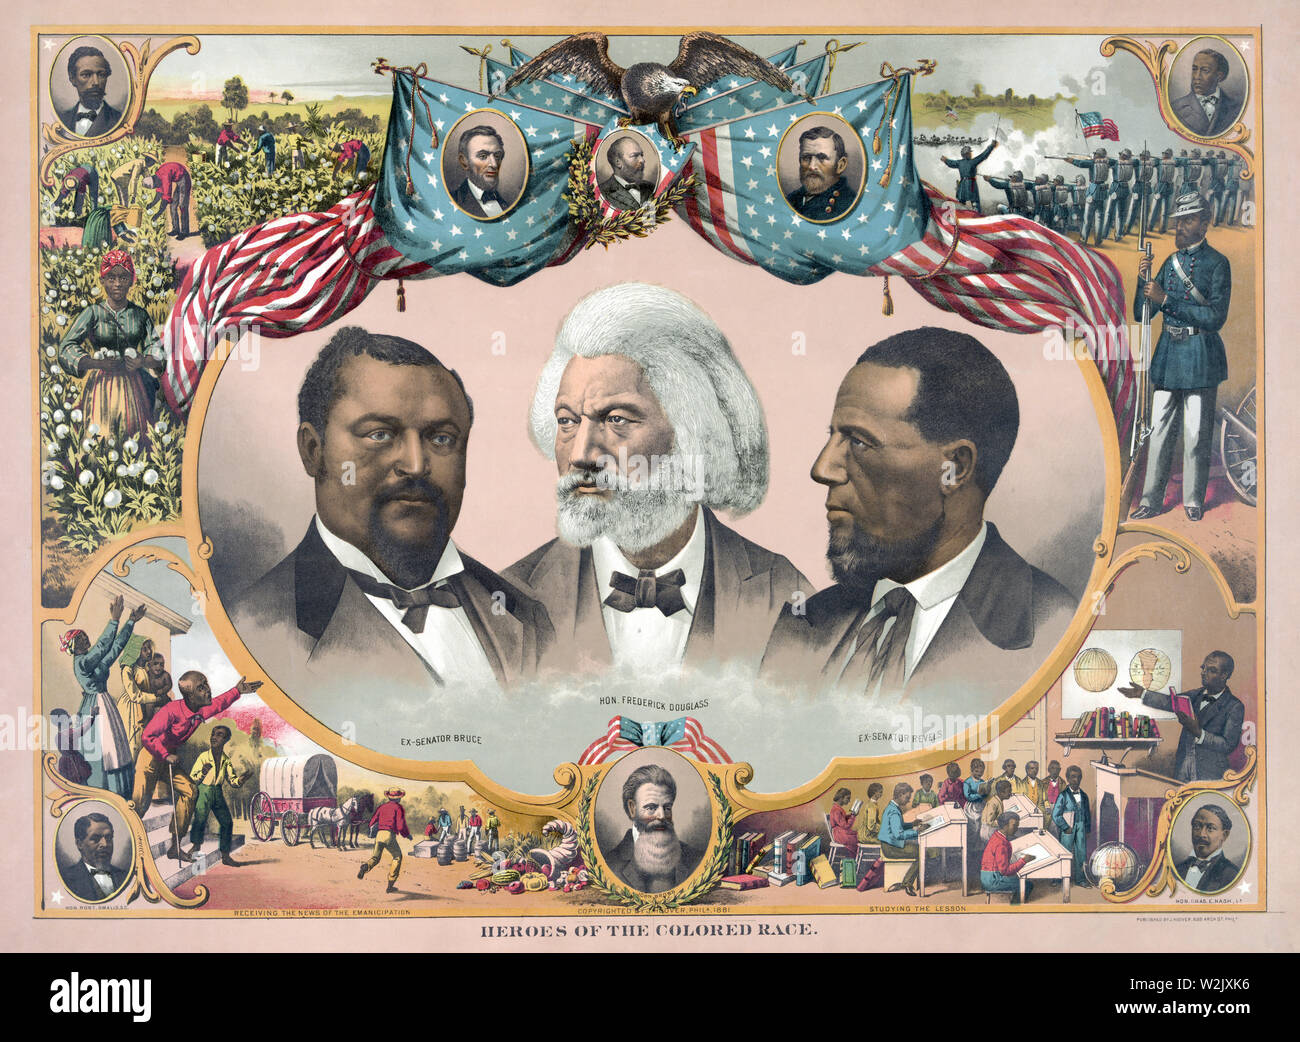 'Heroes of the Colored Race', Featuring Blanche Kelso Bruce, Frederick Douglass, and Hiram Rhoades Revels, Chromolithograph, Published by J. Hoover, Philadelphia, 1881 Stock Photo